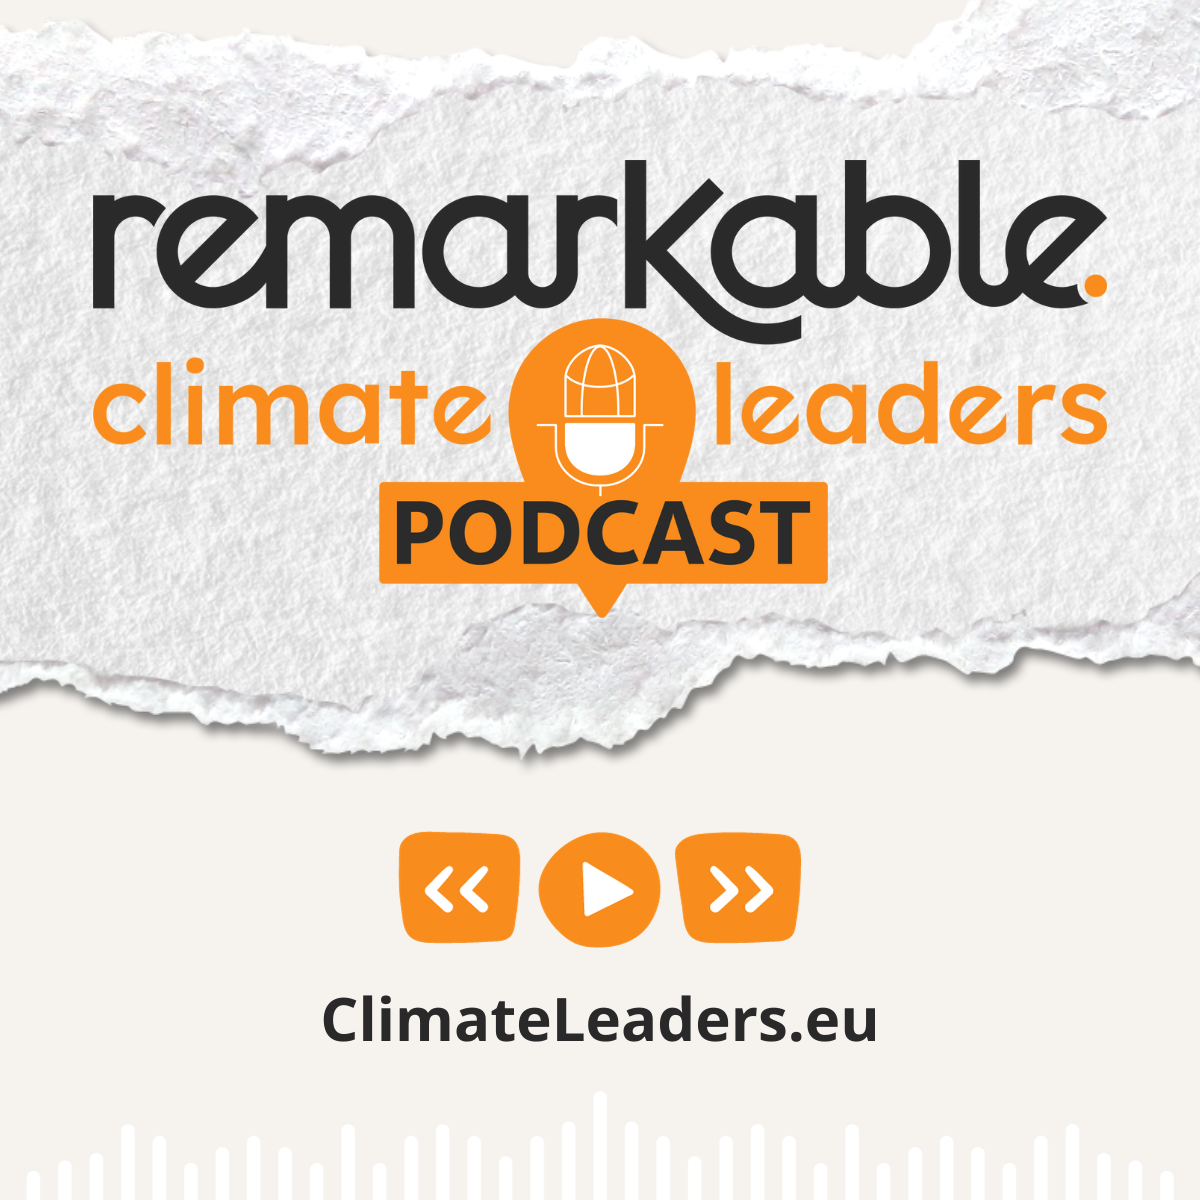 Remarkable Climate Leaders Podcast launch!